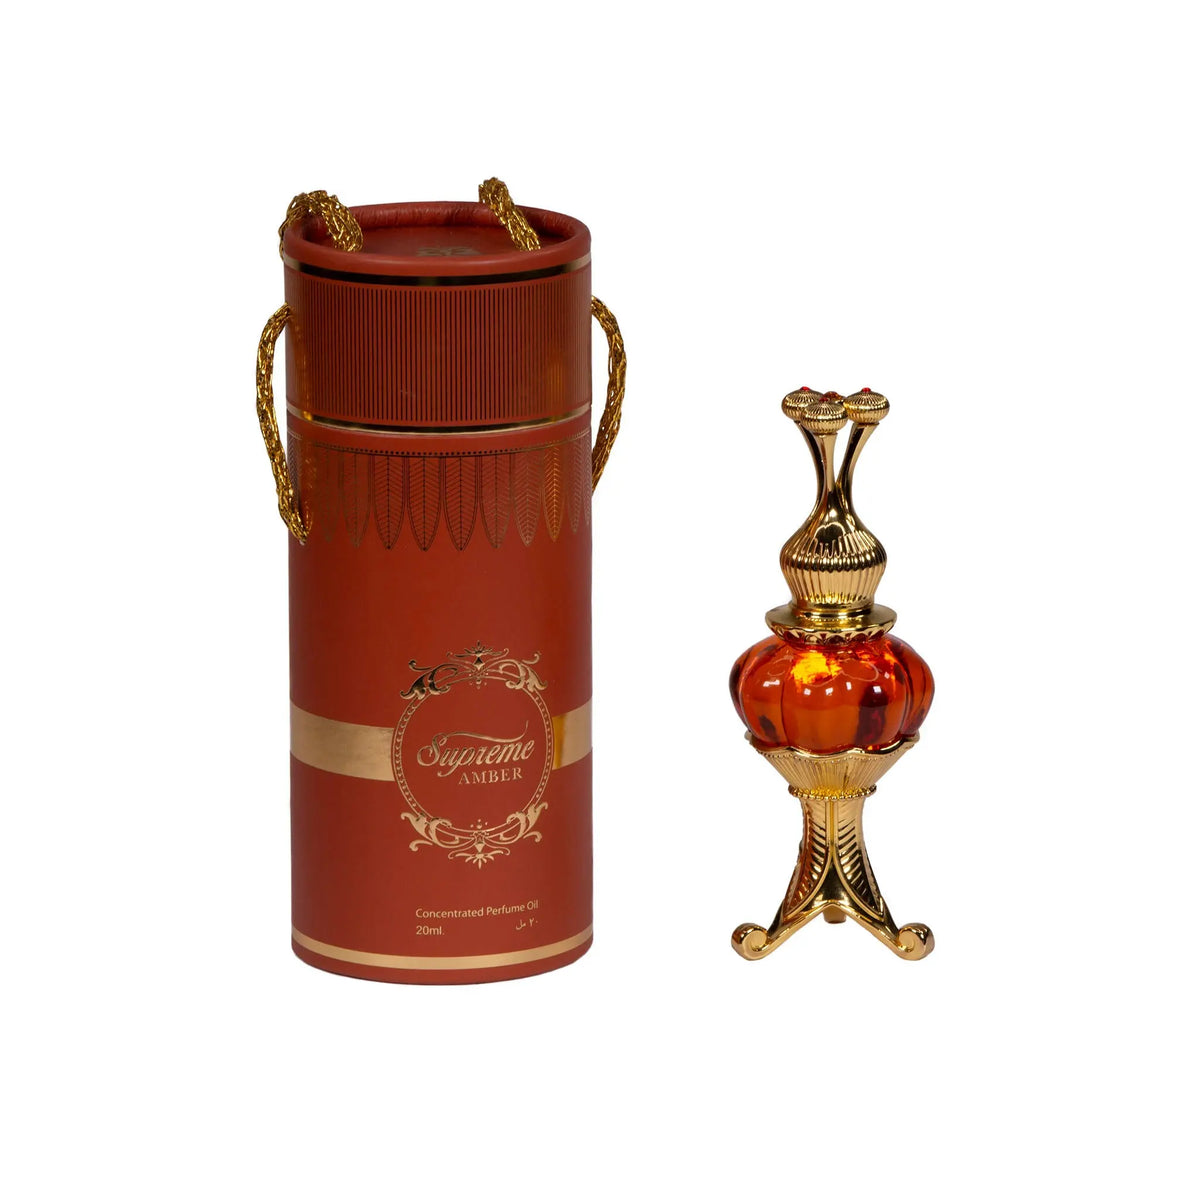 The image features an ornate perfume oil set, consisting of a cylindrical red container with gold trim and decorative elements, and a luxurious golden and red glass perfume oil bottle with an intricate metallic design. The container has a lid with two golden, braided rope-like handles and displays the text "Supreme AMBER" in a decorative golden font, with a smaller inscription "Concentrated Perfume Oil 20ml" below. 